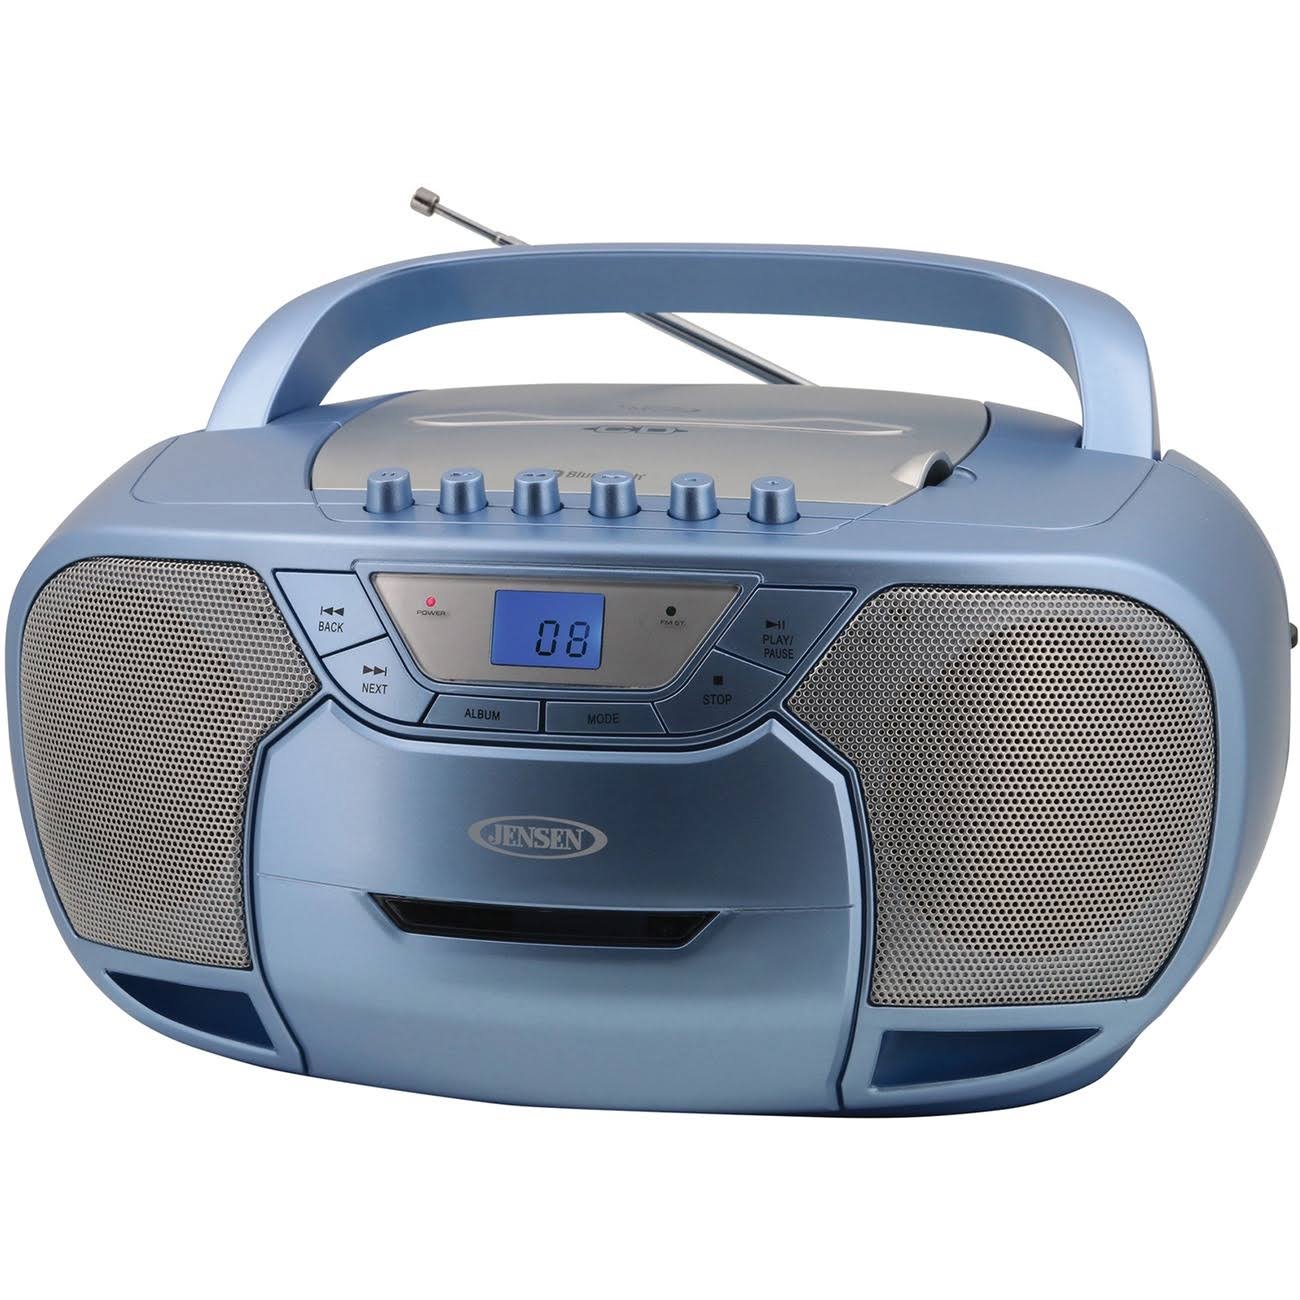 Jensen CD-590-BL CD-590 1-Watt Portable Stereo CD and Cassette Player/Recorder With AM/FM Radio and Bluetooth (Blue)